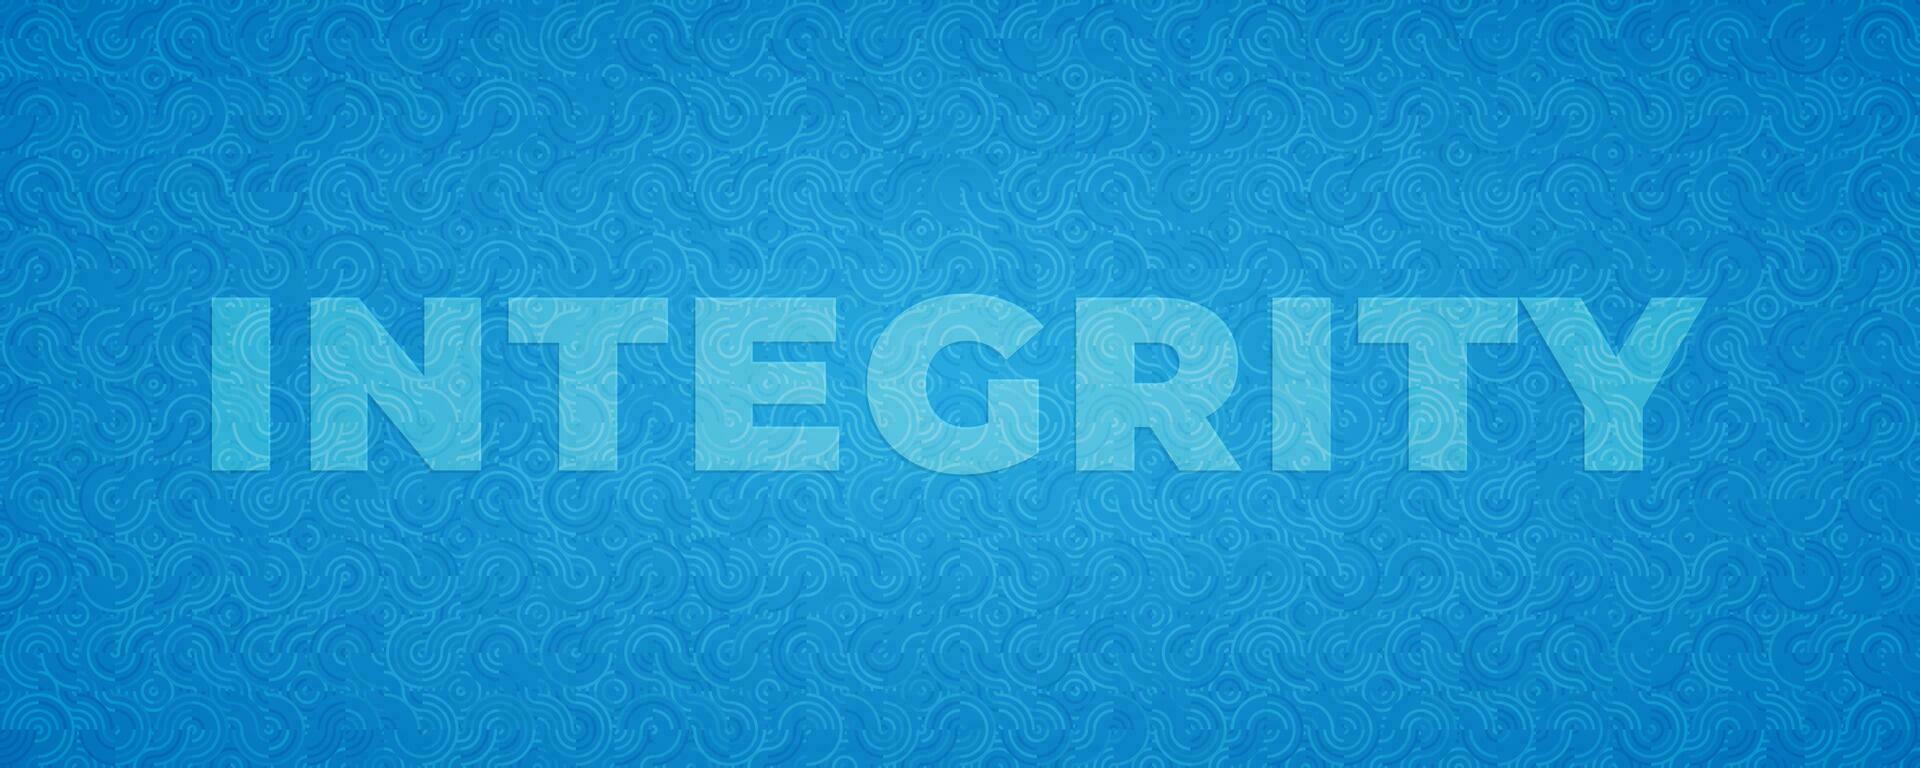 Integrity text on blue background, concept. vector